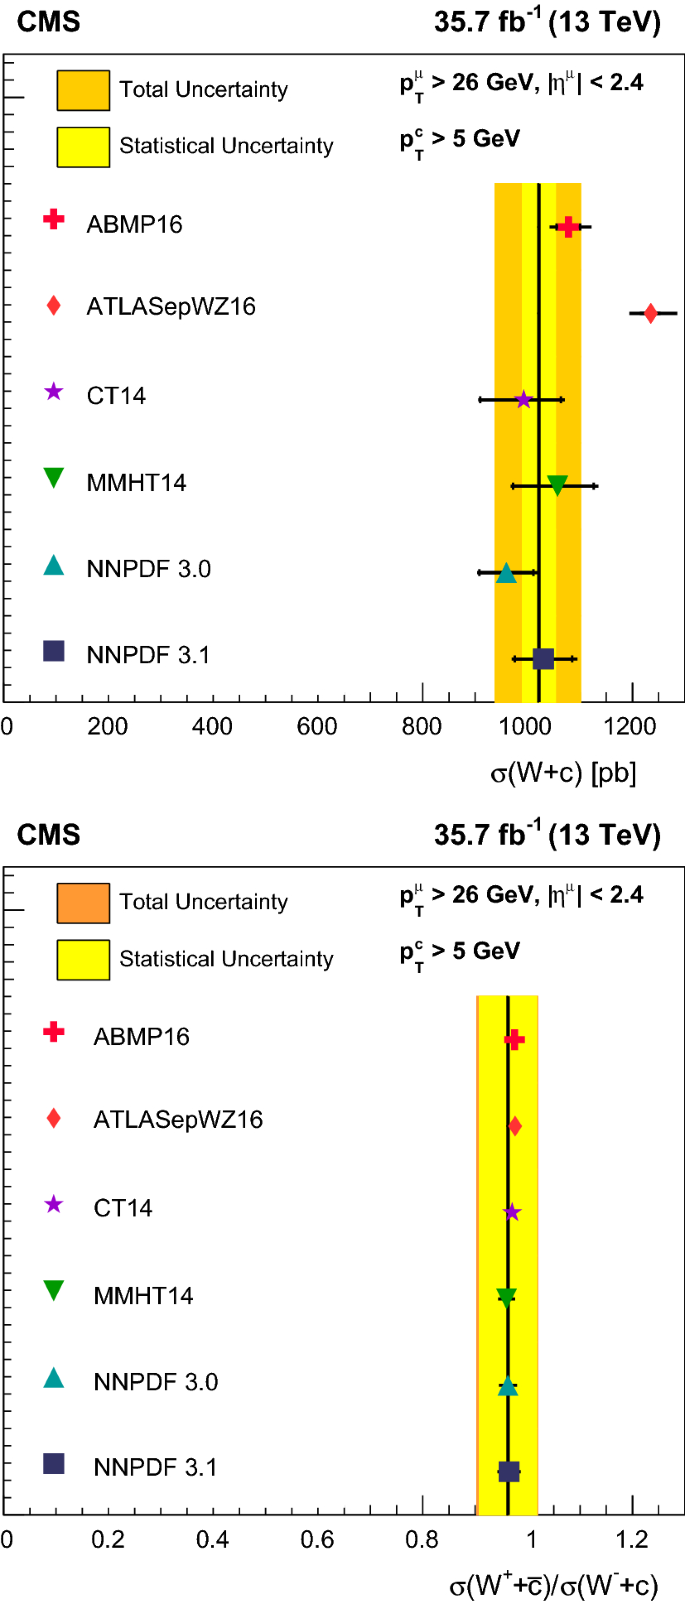 Measurement Of Associated Production Of A Mathrm W W Boson And A Charm Quark In Proton Proton Collisions At Sqrt S 13 Text Te Text V S 13 Te Springerlink